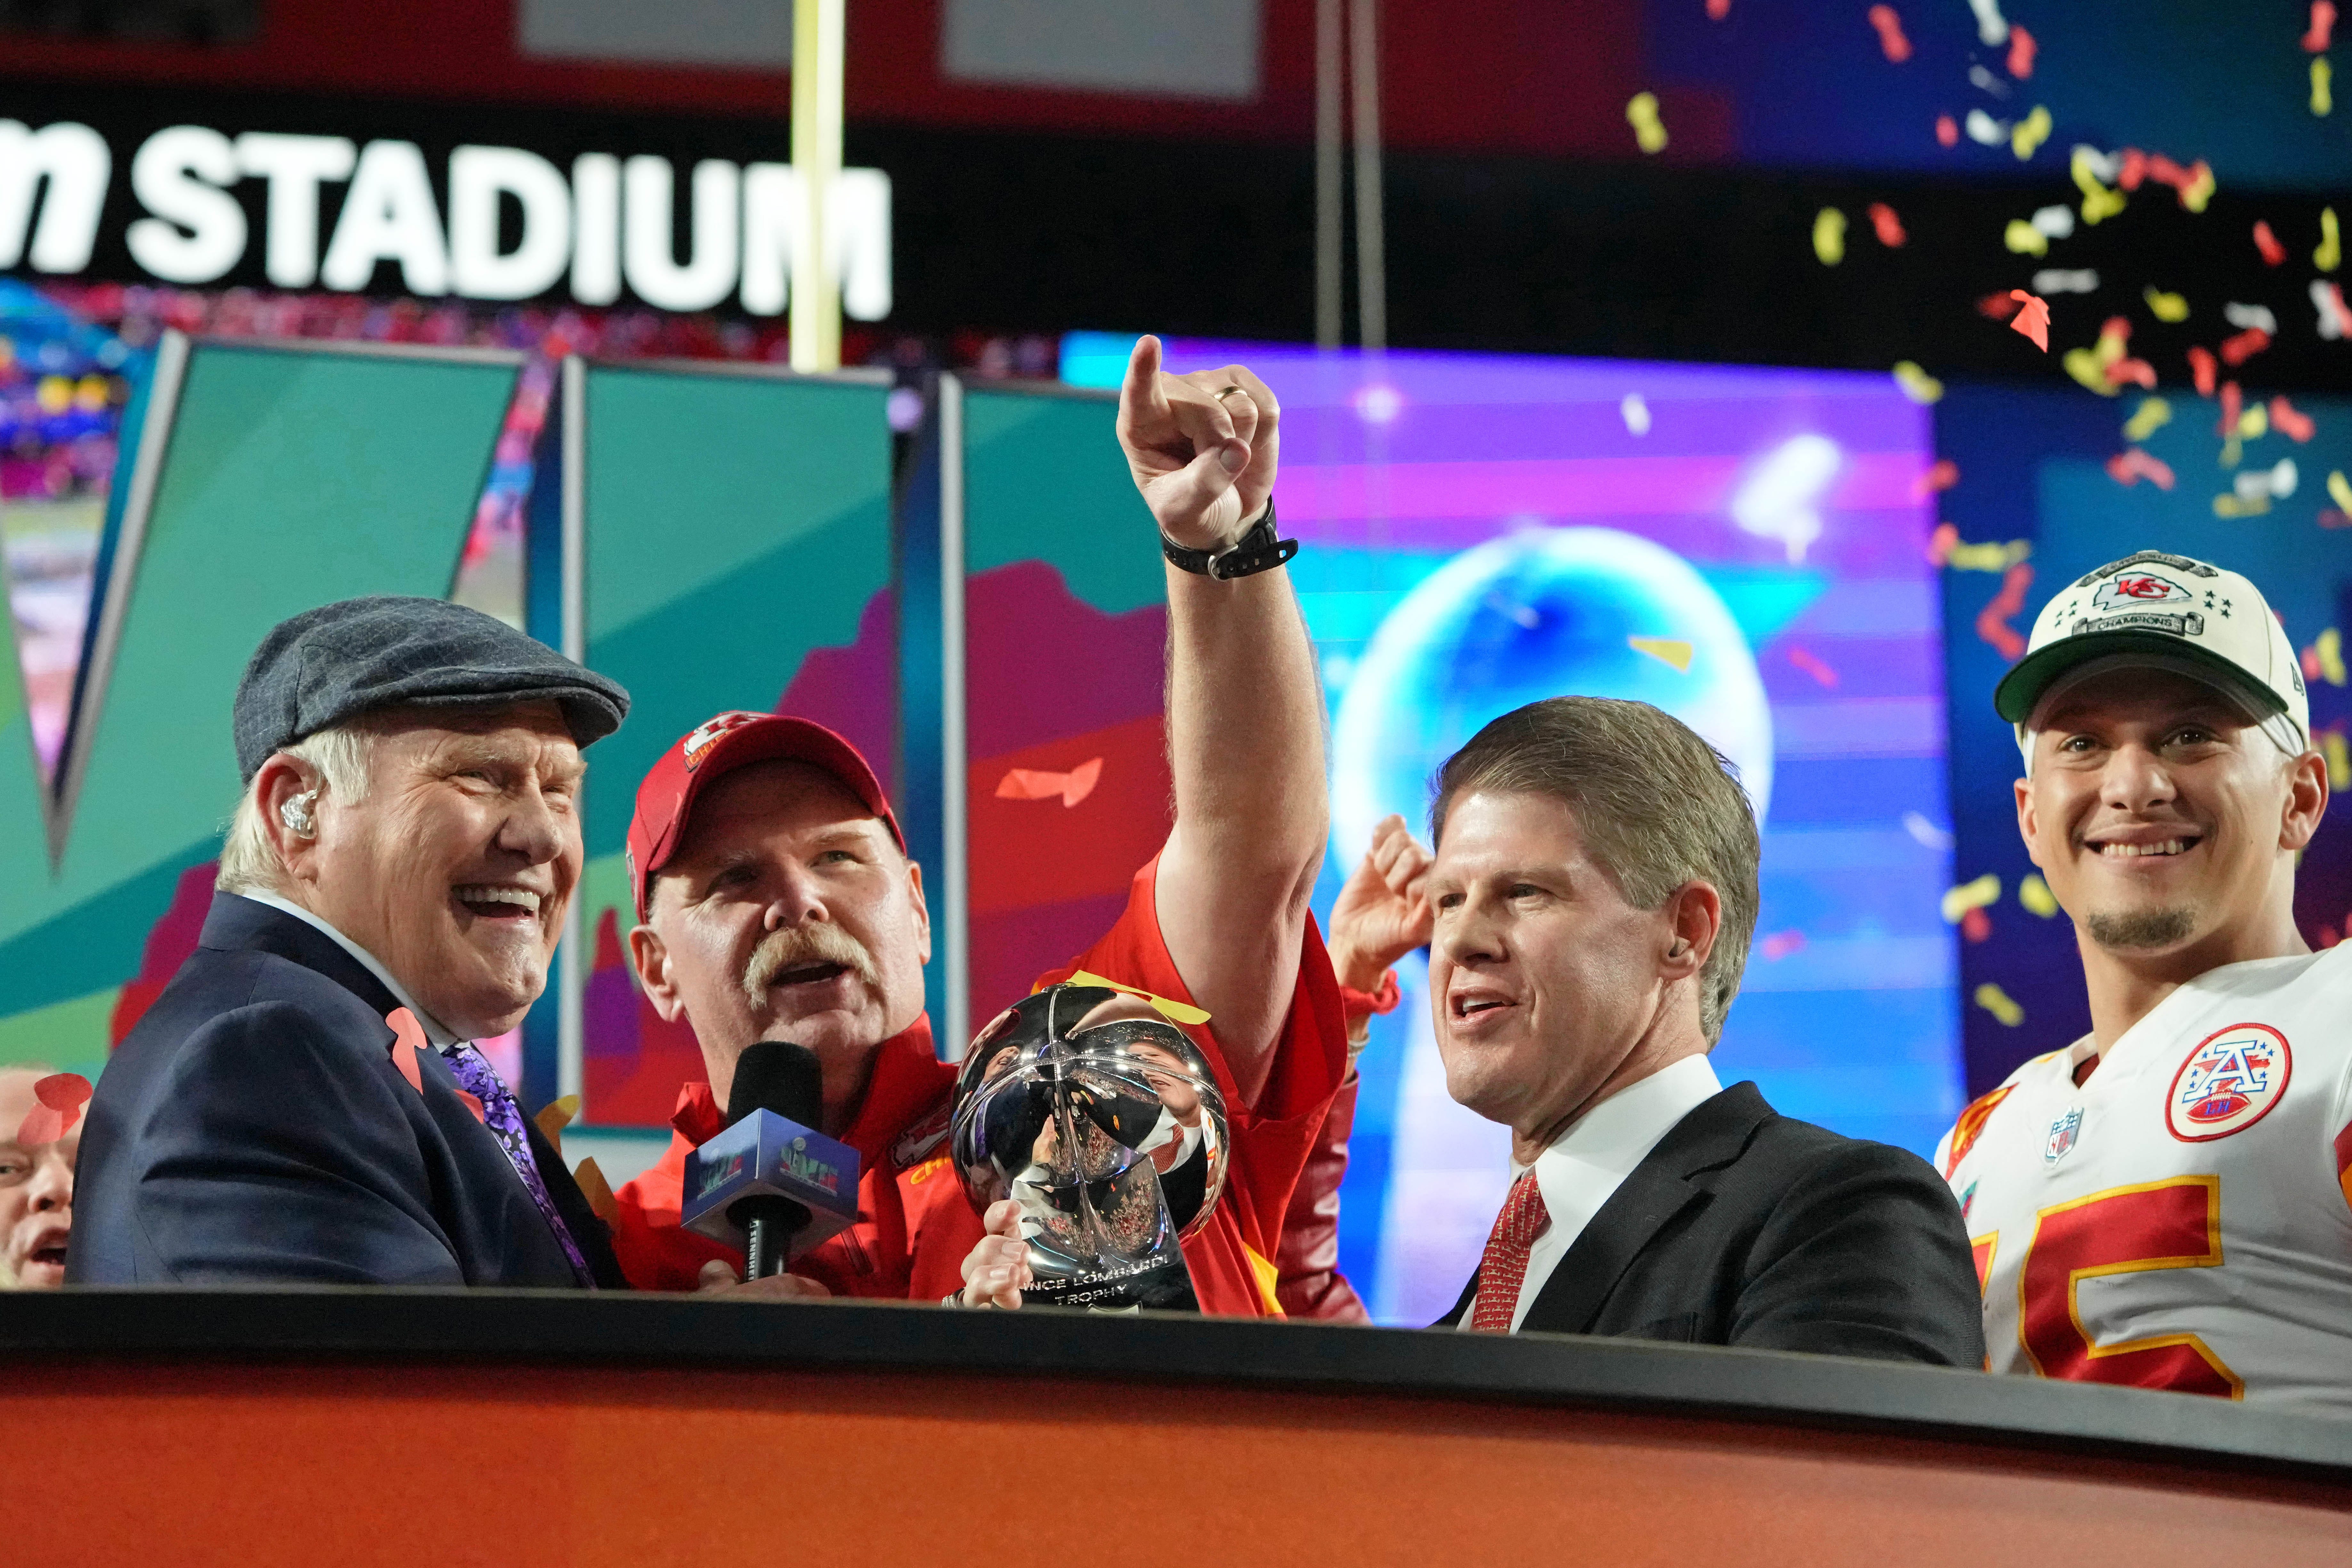 Terry Bradshaw and Chris Berman's cringeworthy comments not up to Super Bowl standards